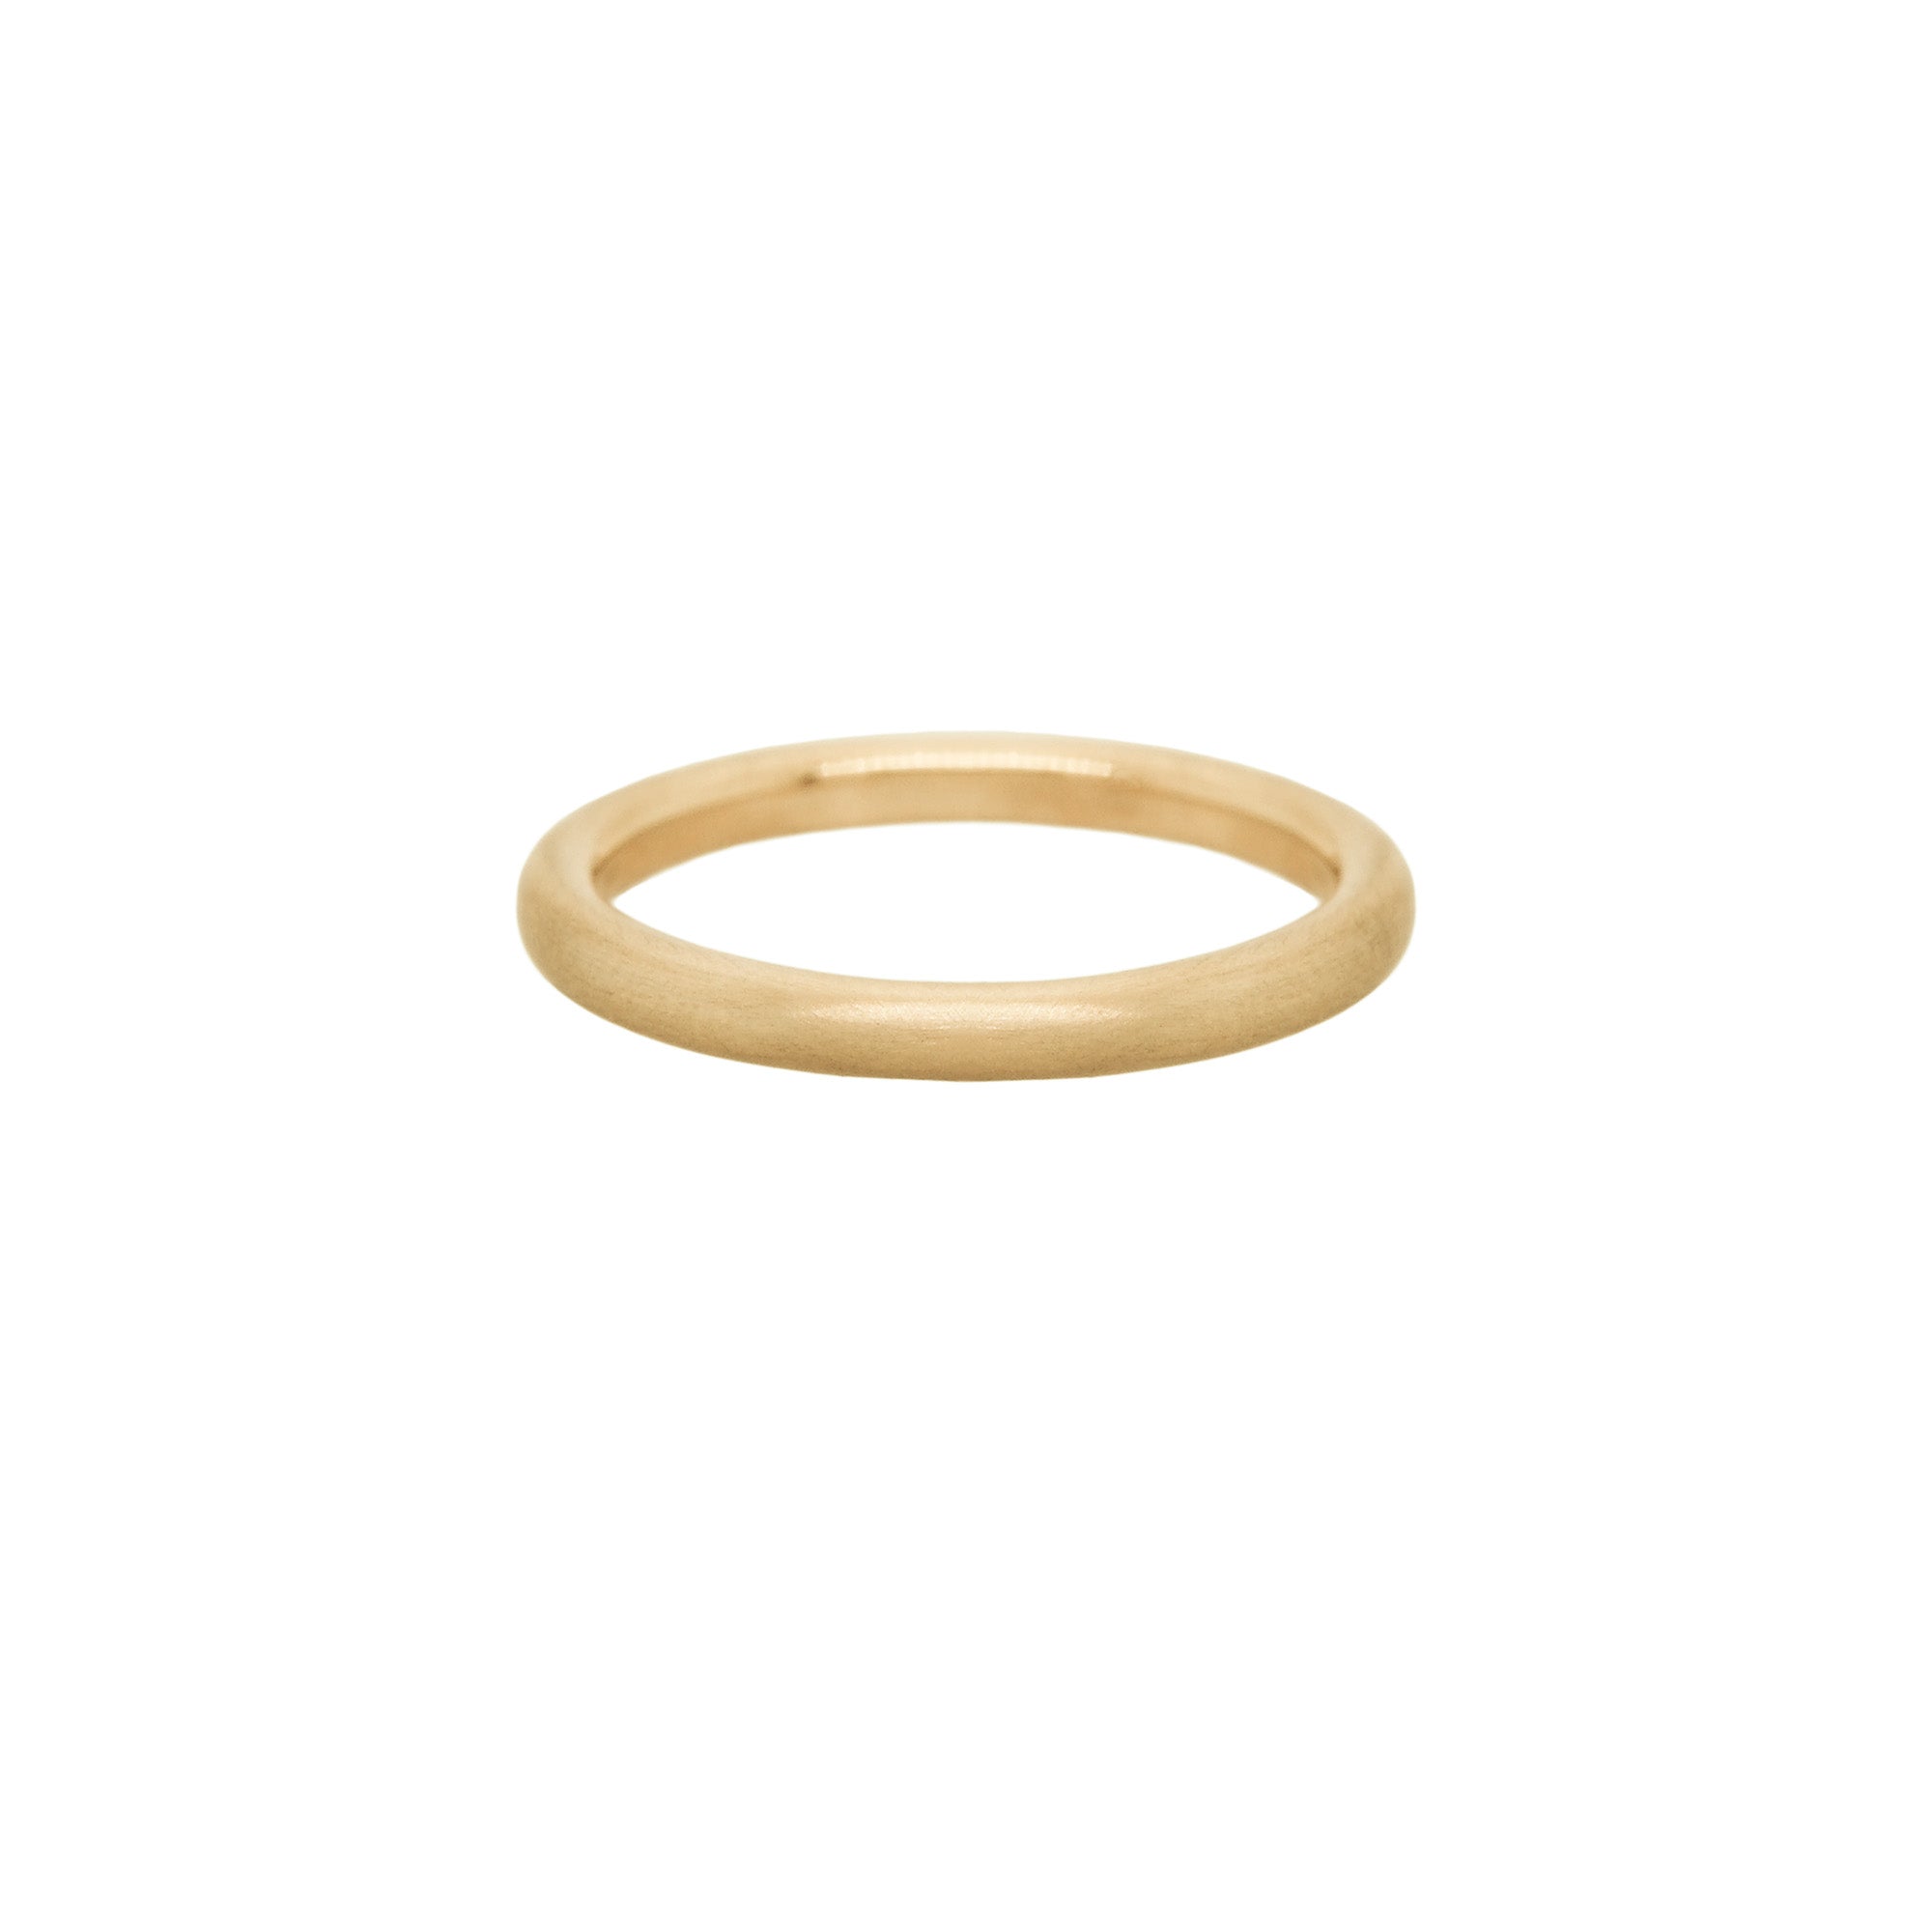 A stock photo of Laurie Fleming Jewellery's plain solid gold "Peach" band, a 2.1mm wide round wire stacking ring/wedding band, handmade in Toronto. The ring has a soft satin brushed finish and is on a white background.